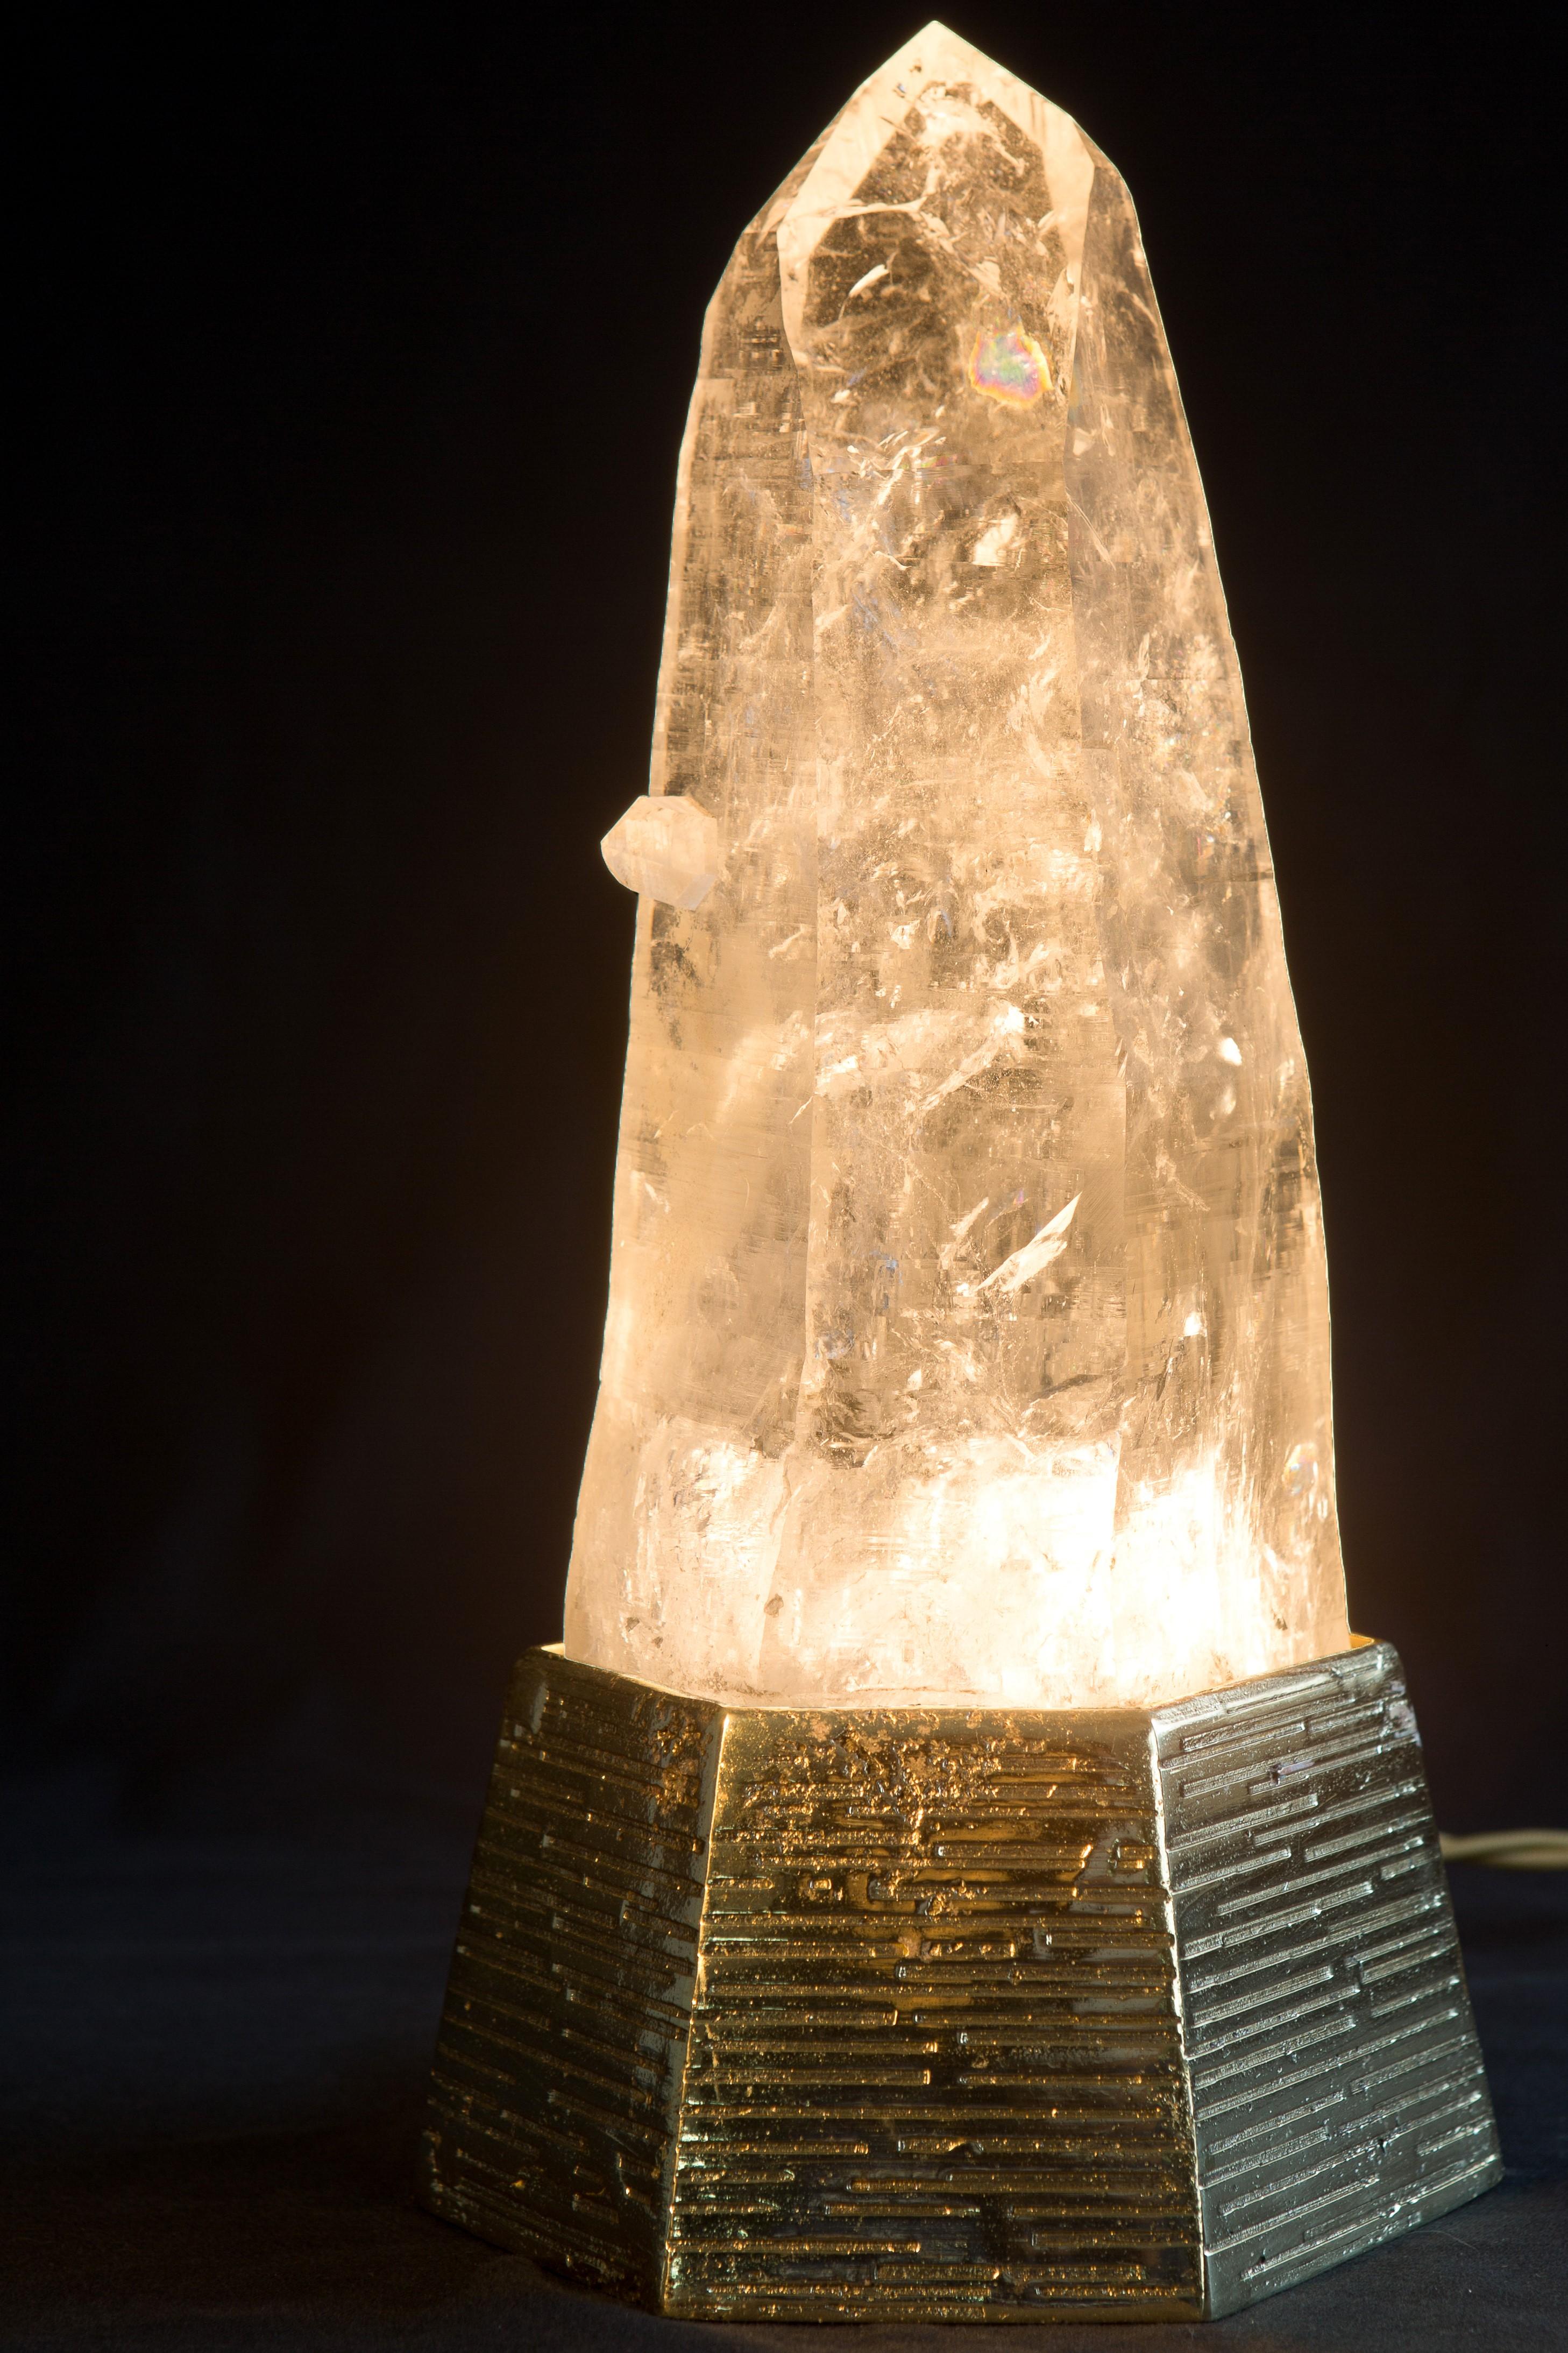 Ele natural quartz table lamp by Demian Quincke
Dimensions: diameter 13 x height 33 cm
Materials: Casted bronze base and extra natural quartz point with bud

5W, GU-10 Led light inside, Bi-Volt 110/220 V
4.1 kg natural rock crystal point, 2.1